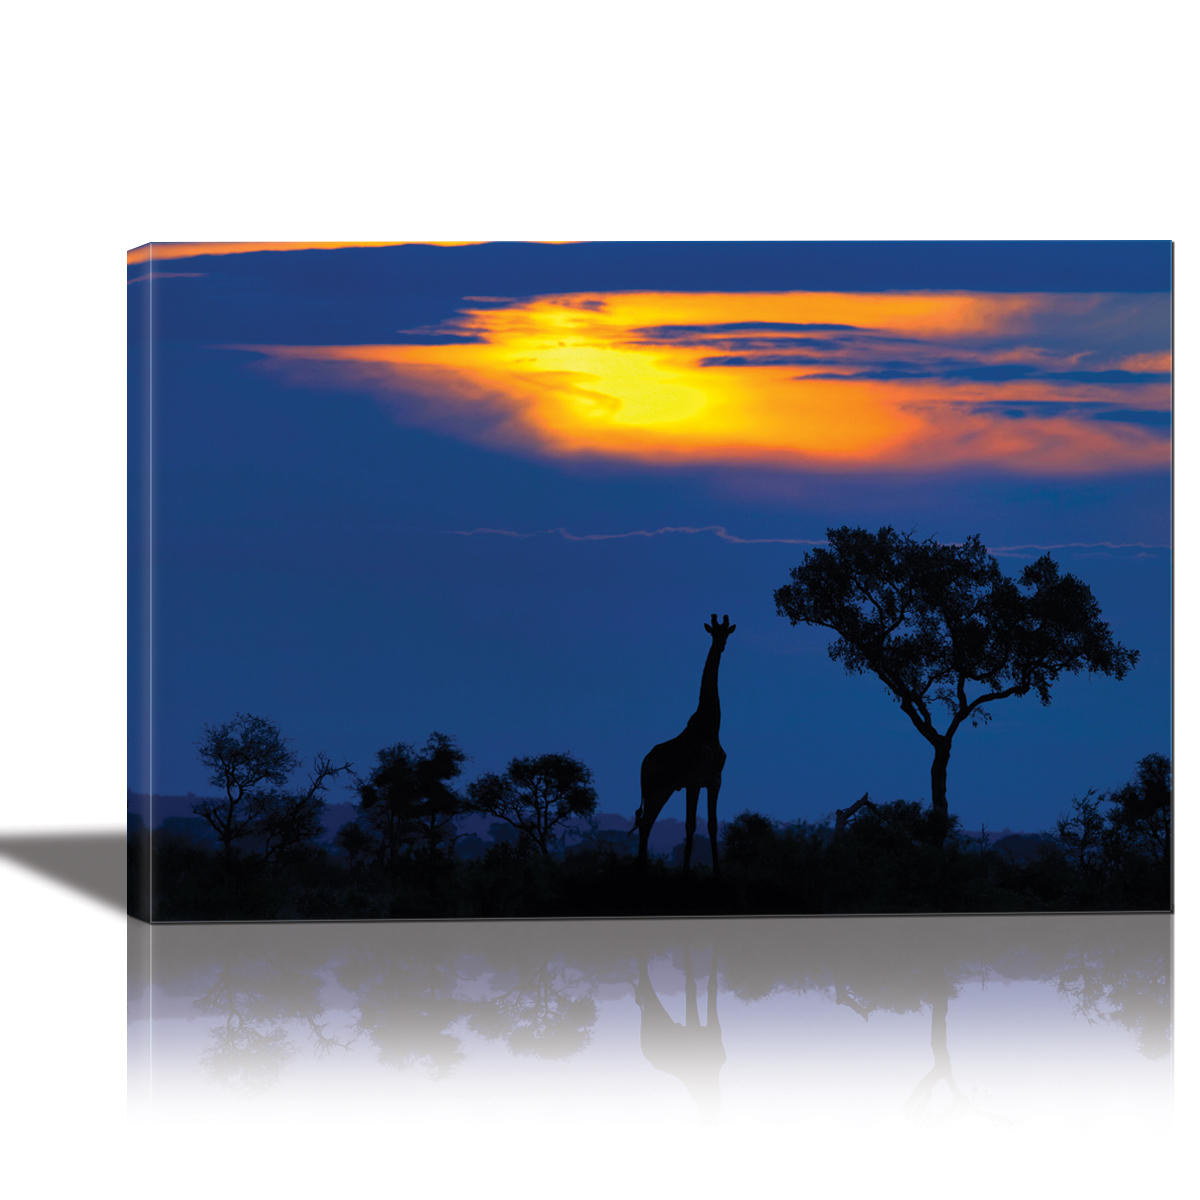 1751-94152 24 X 36 In. A Giraffe At Sunset Painting Artwork For Home Decor Framed Canvas Wall Art - Multi Color